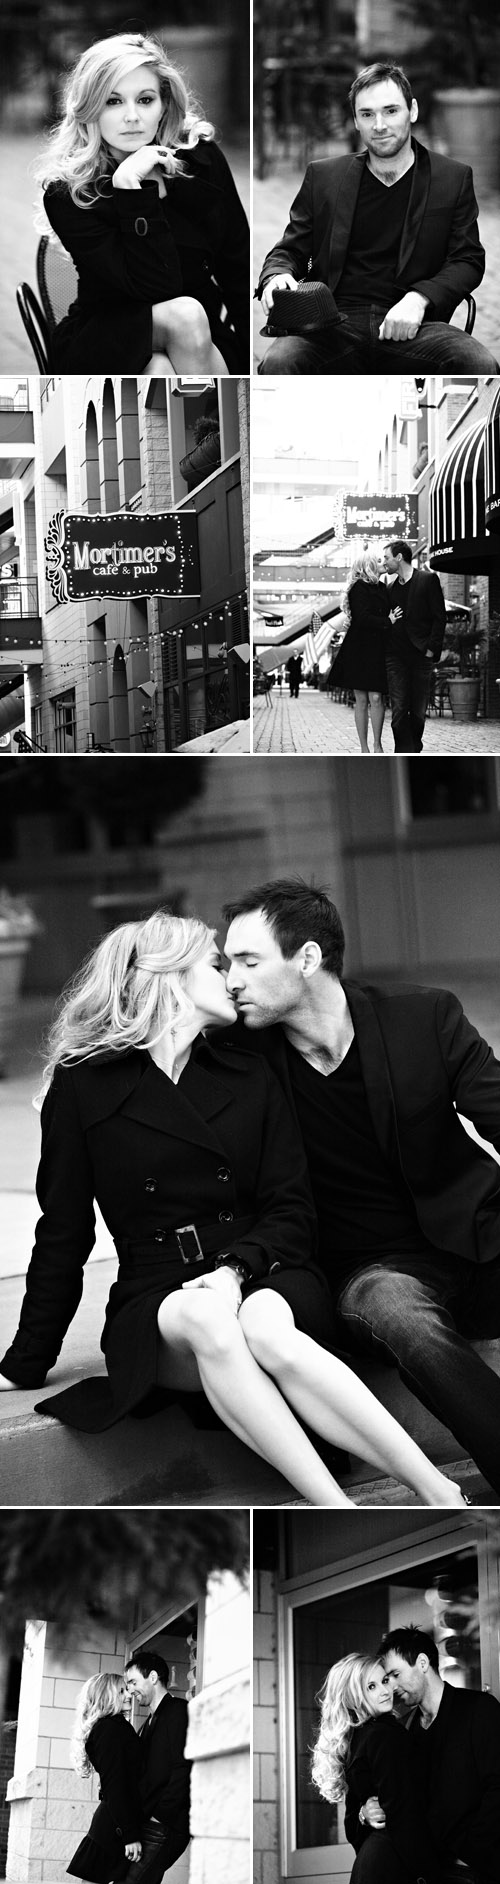 Charlotte, North Carolina engagement photos inspired by Faith Hill and Tim McGraw's music video Let's Make Love, photos by Kristin Vining